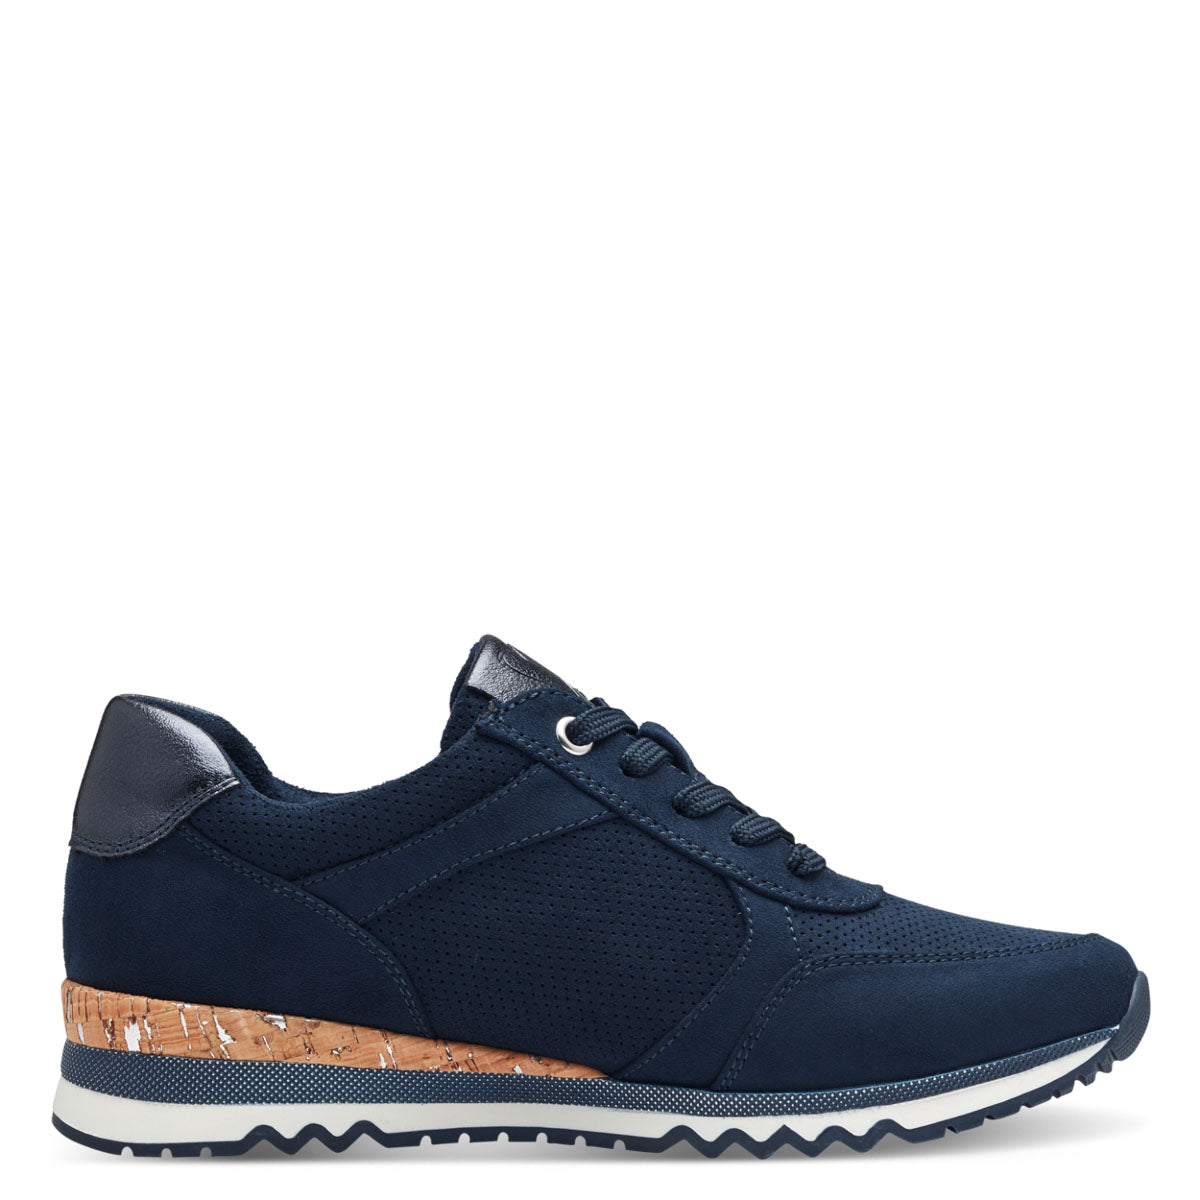 Marco Tozzi Navy Runner with Unique Wedge Sole and Side Zip